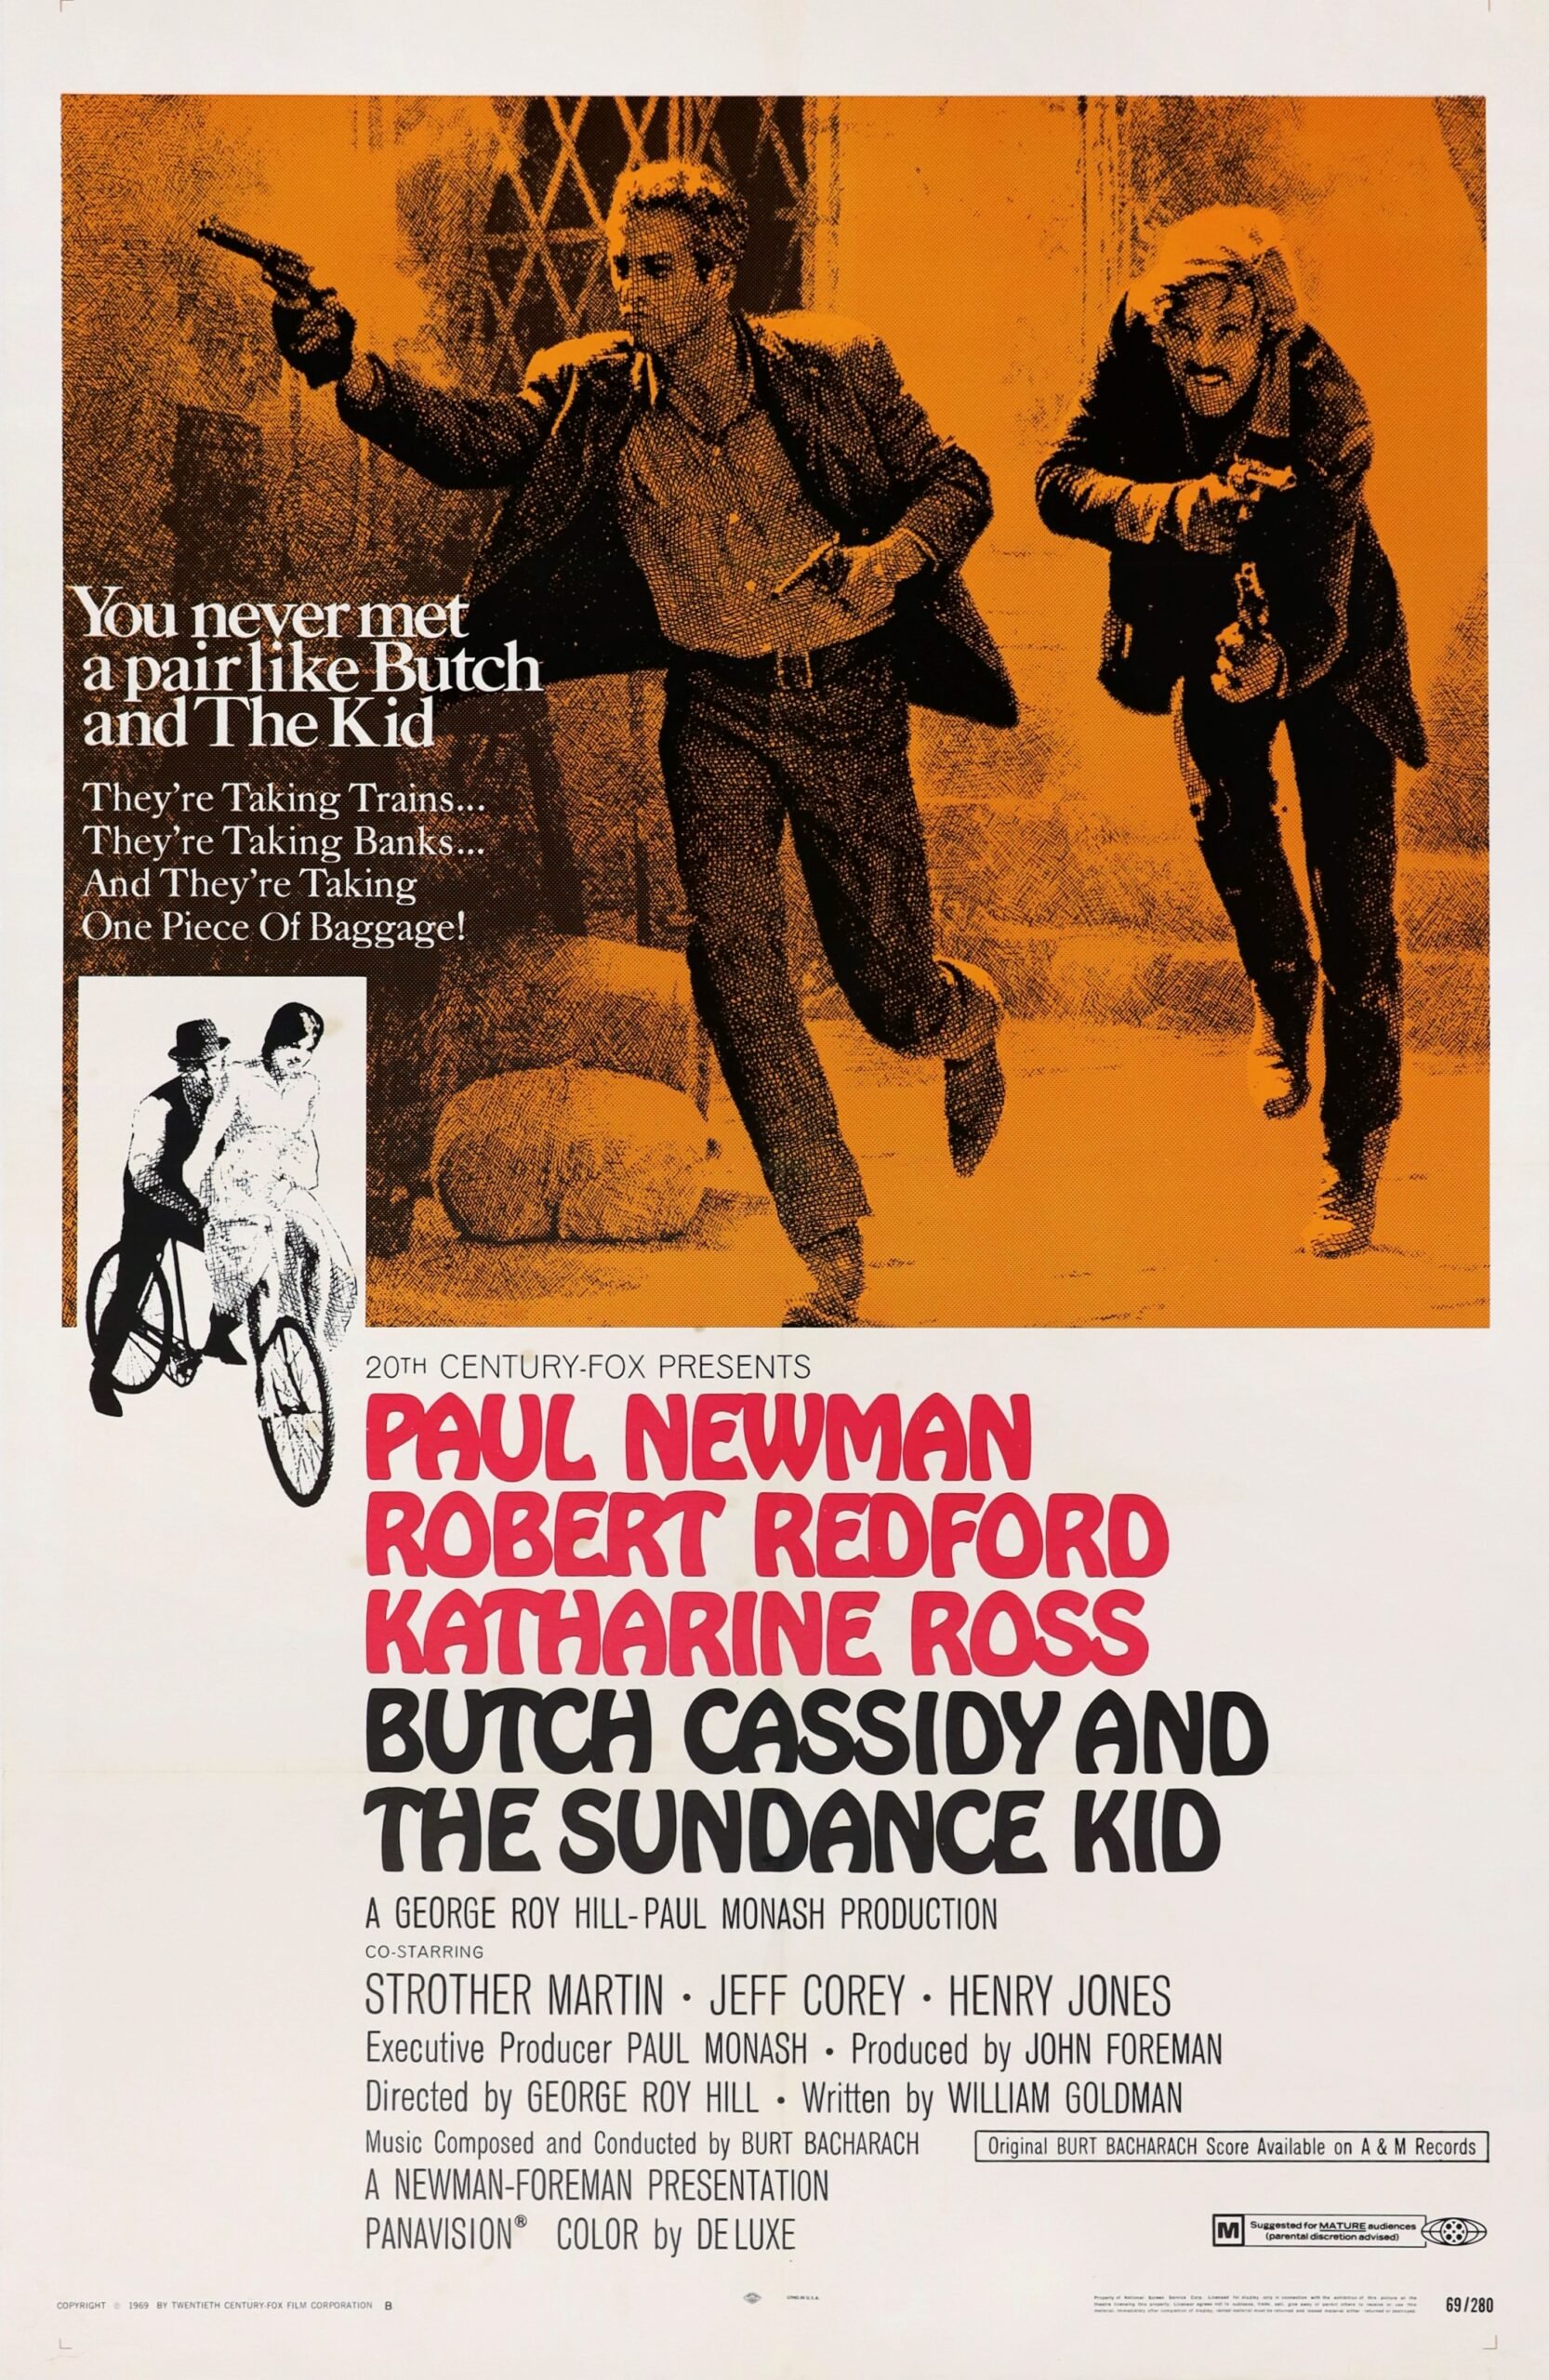 Original vintage cinema movie poster for Butch Cassidy and the Sundance Kid, starring Paul Newman and Robert Redfo